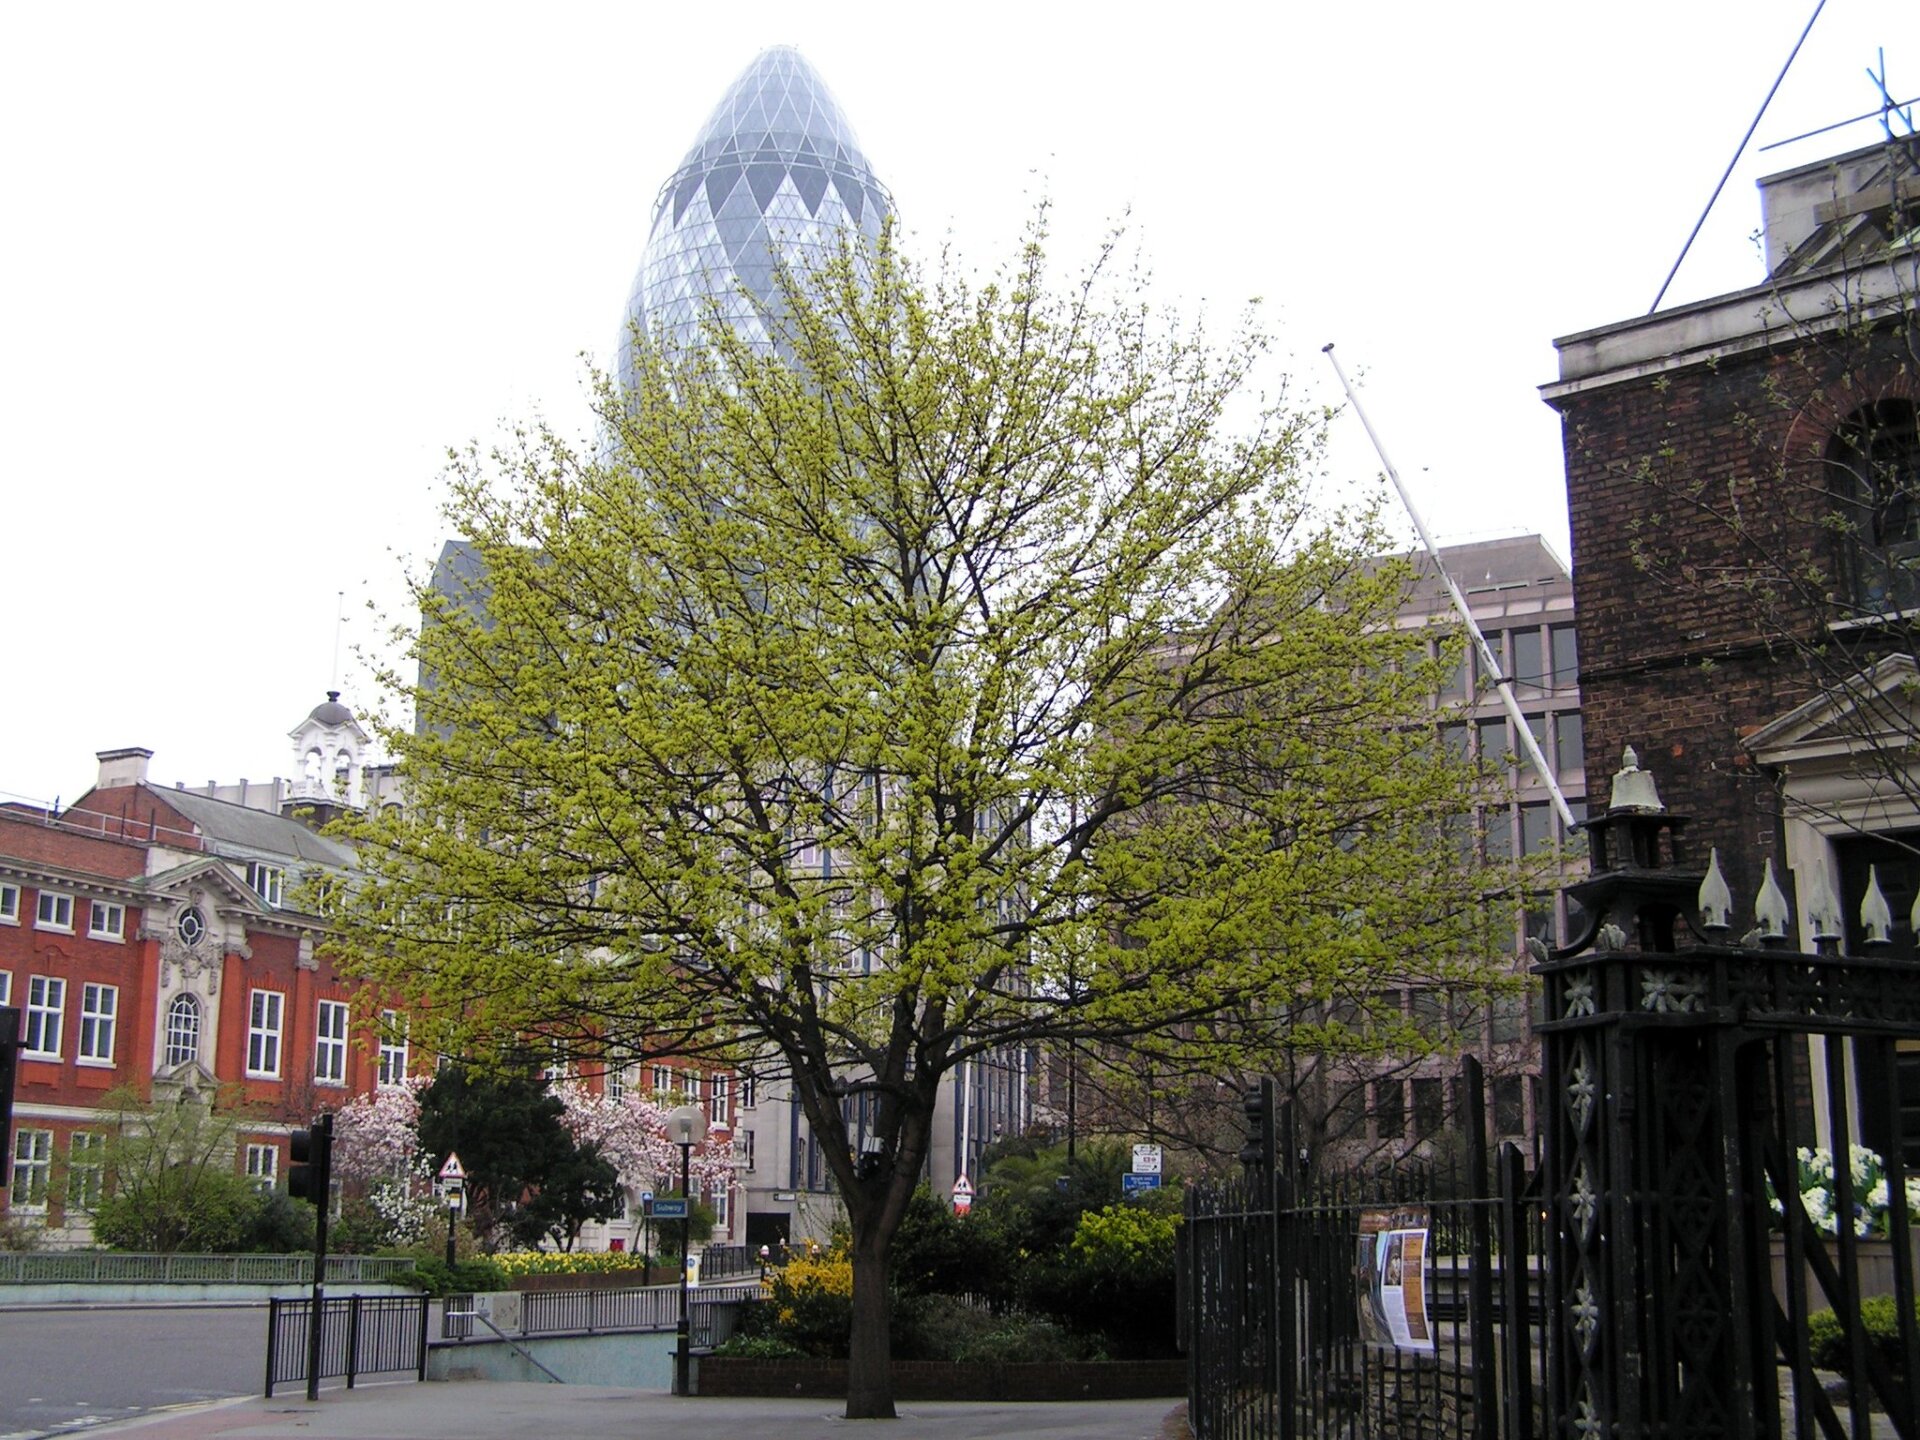 A tree with fresh green leaves on a London street, with the top of the Gherkin visible in the background.